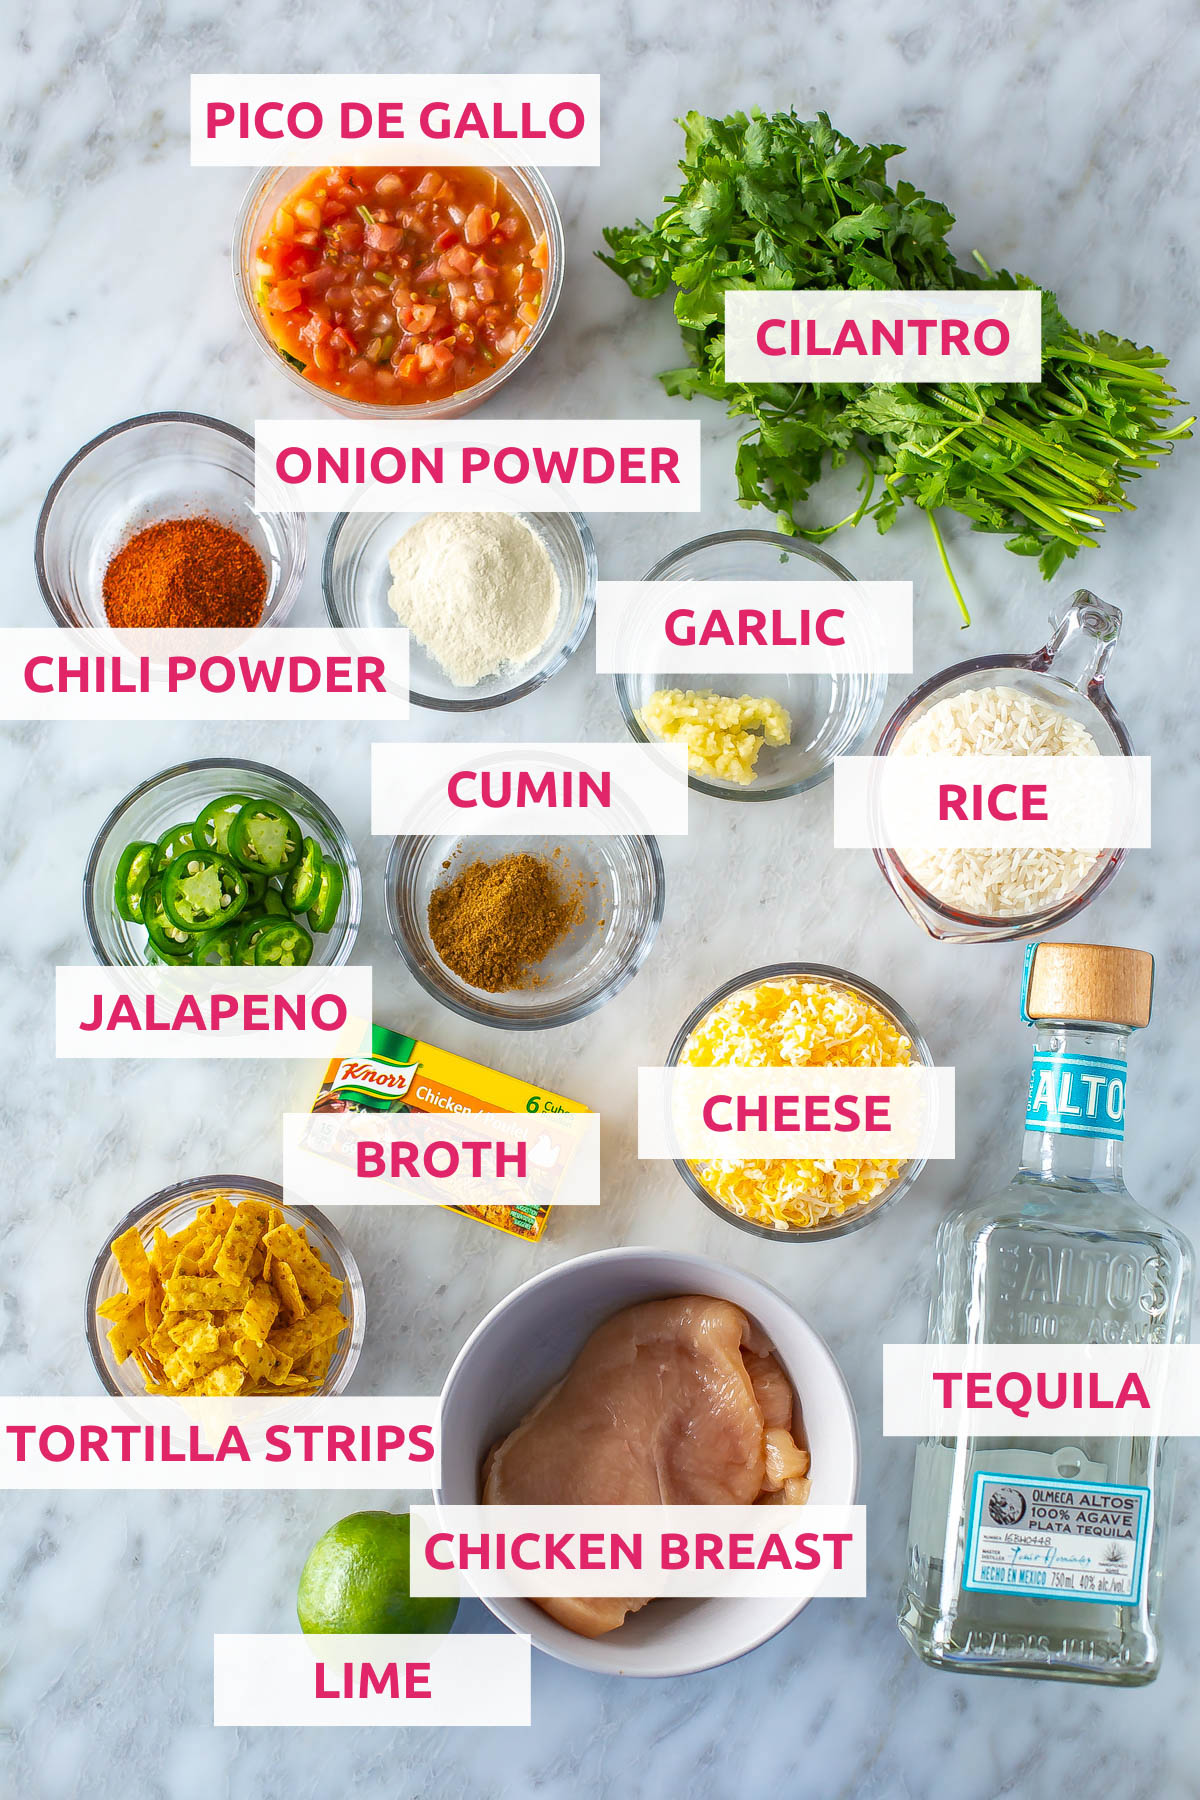 Ingredients for tequila lime chicken: pico de gallo, cilantro, rice, tequila, chicken breast, lime, tortilla strips, cheese, broth, jalapeno, garlic, cumin, chili powder, and onion powder.